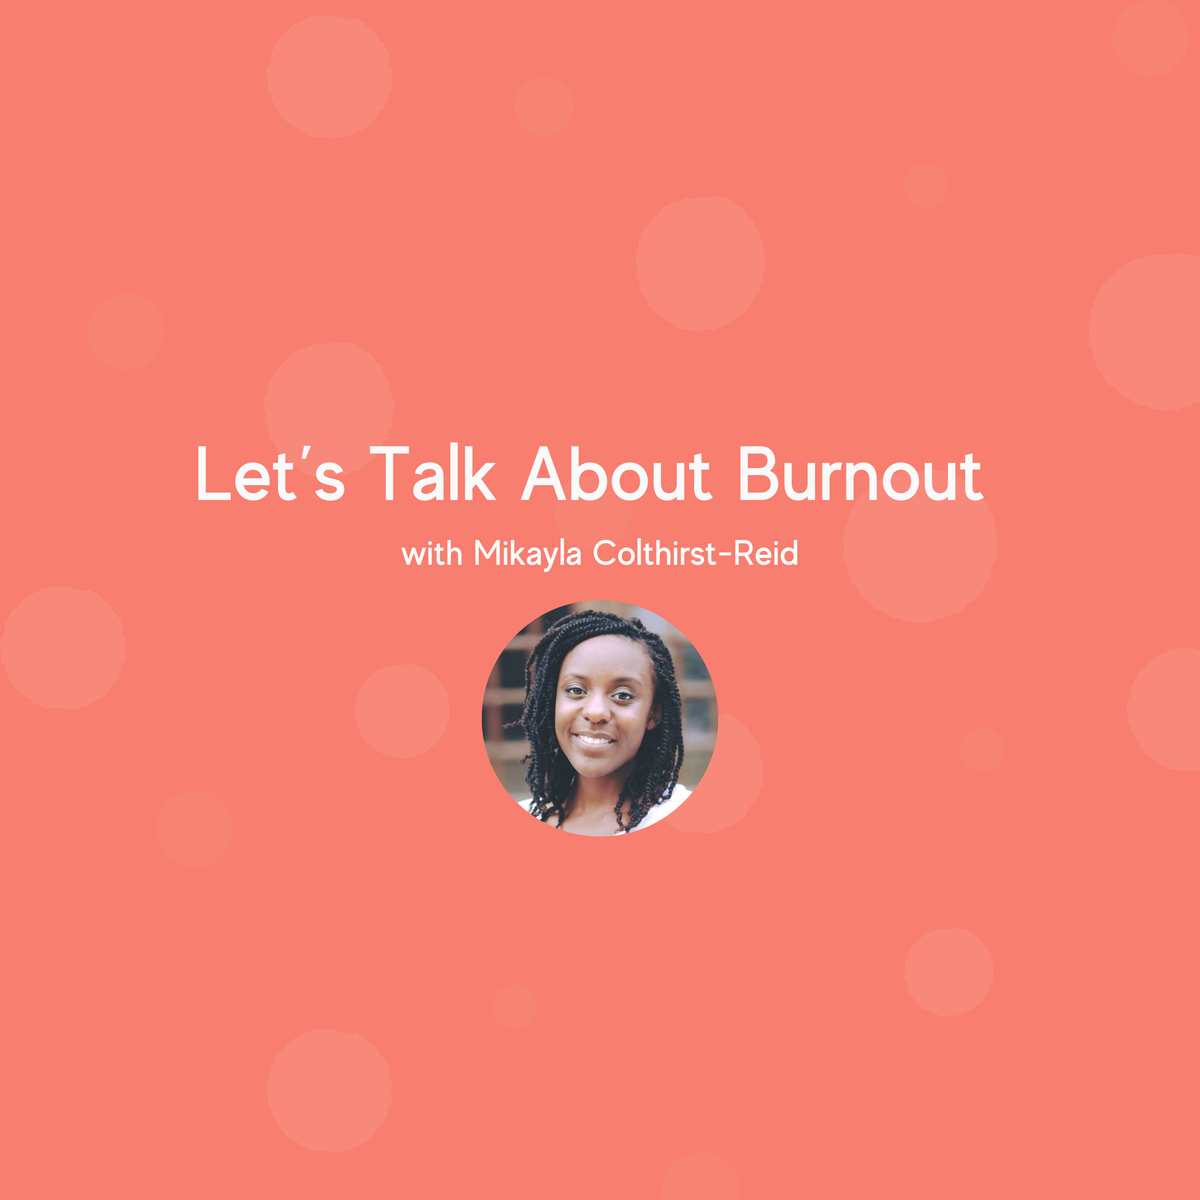 Let’s Talk About Burnout with Mikayla Colthirst-Reid